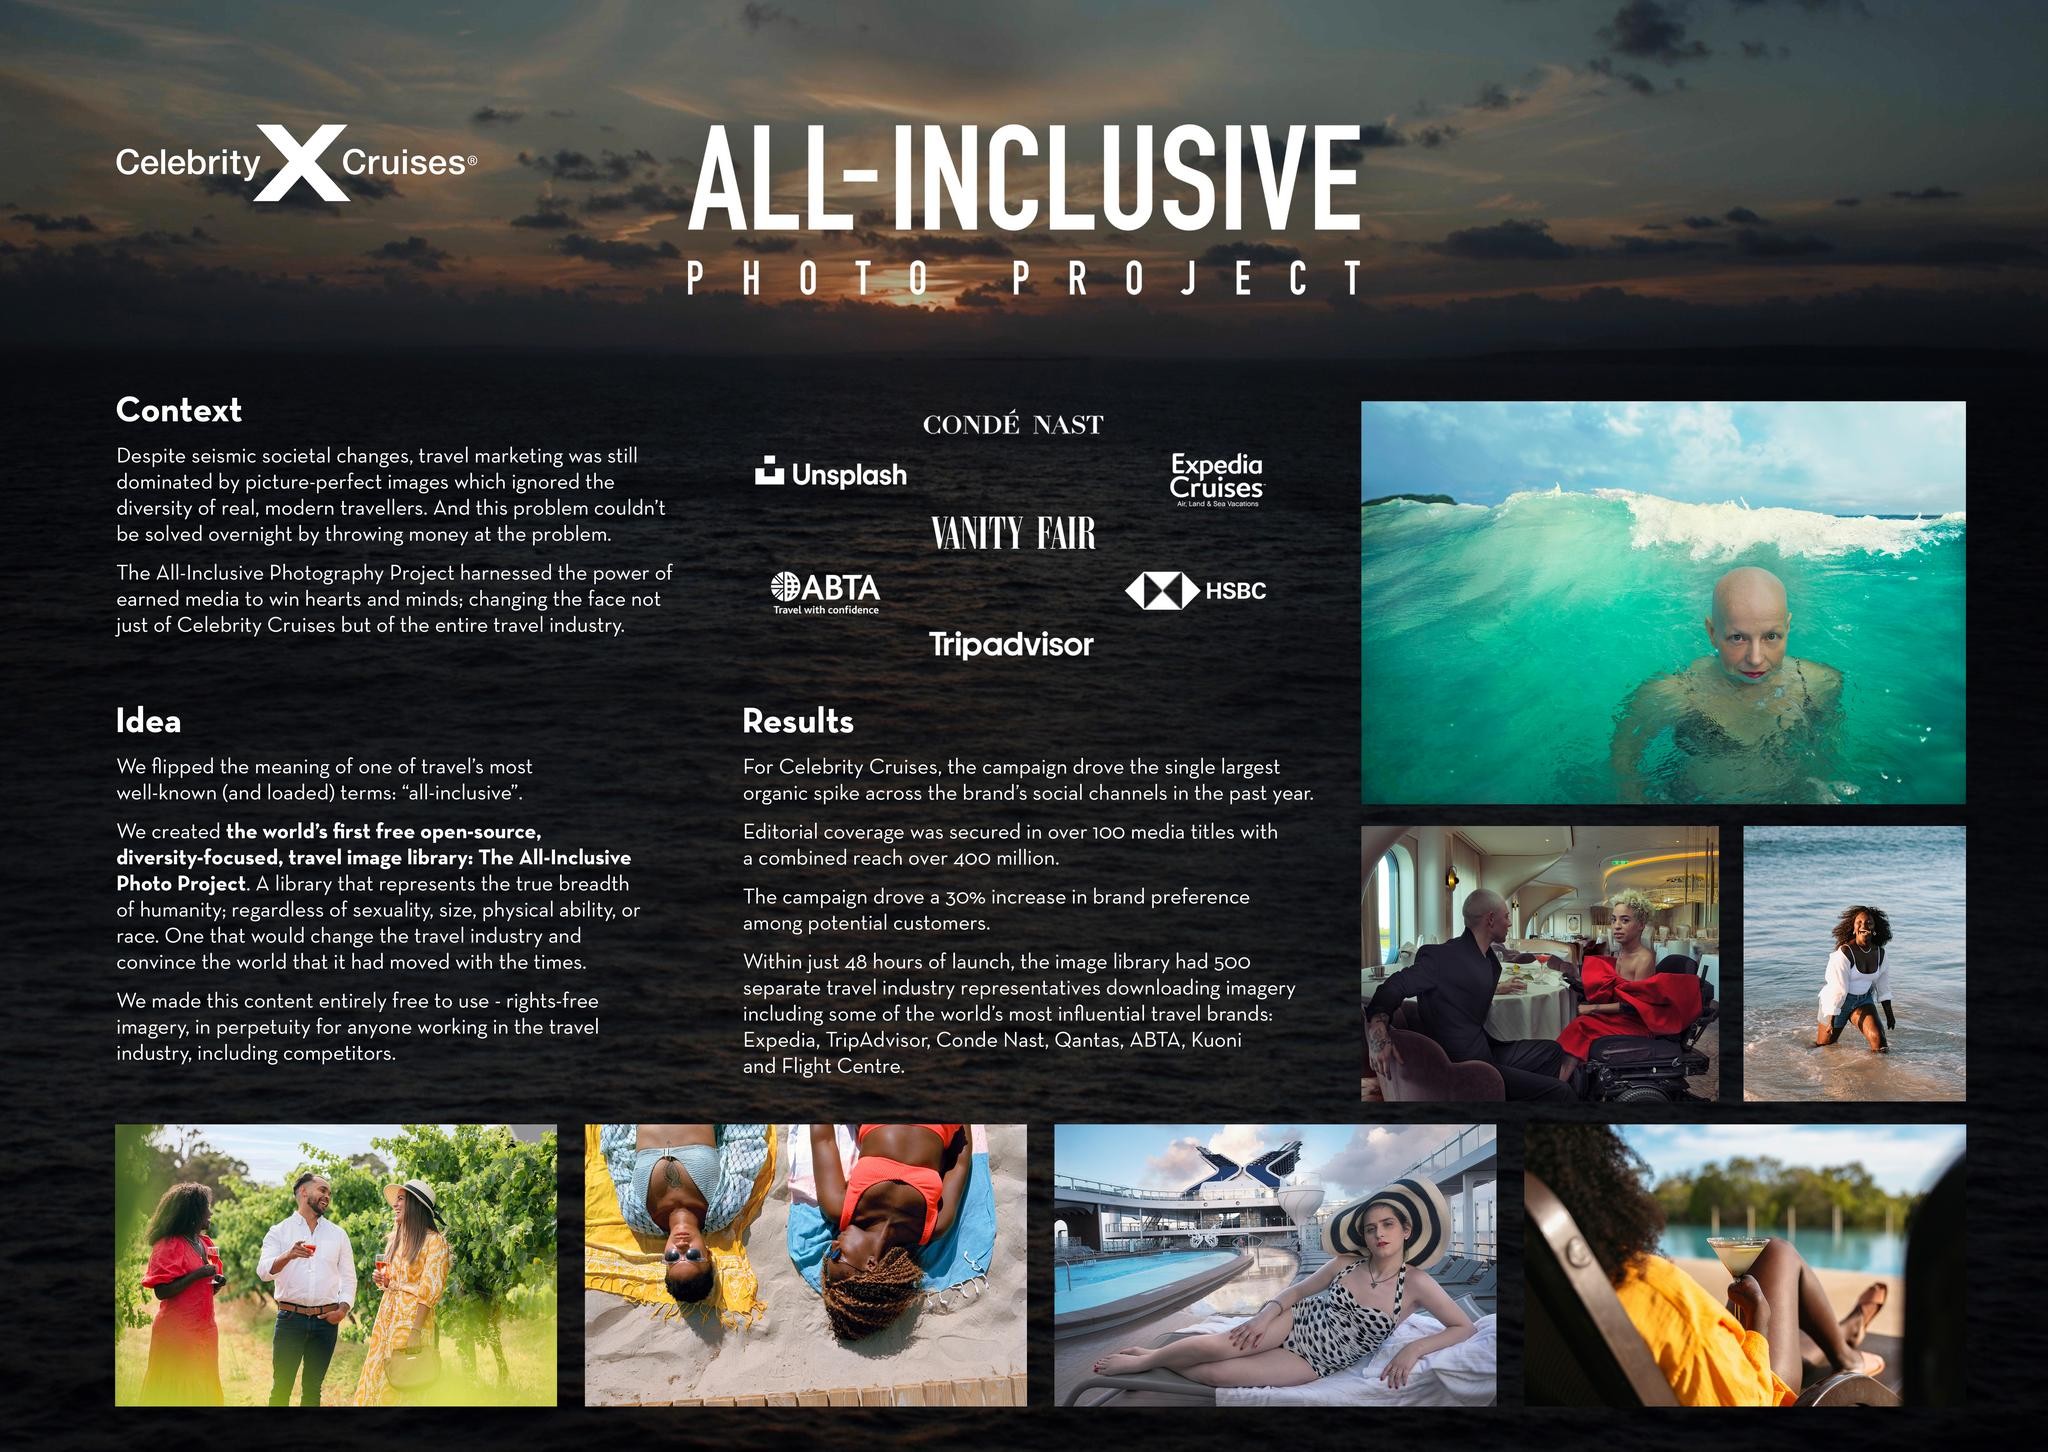 The All Inclusive Photo Project